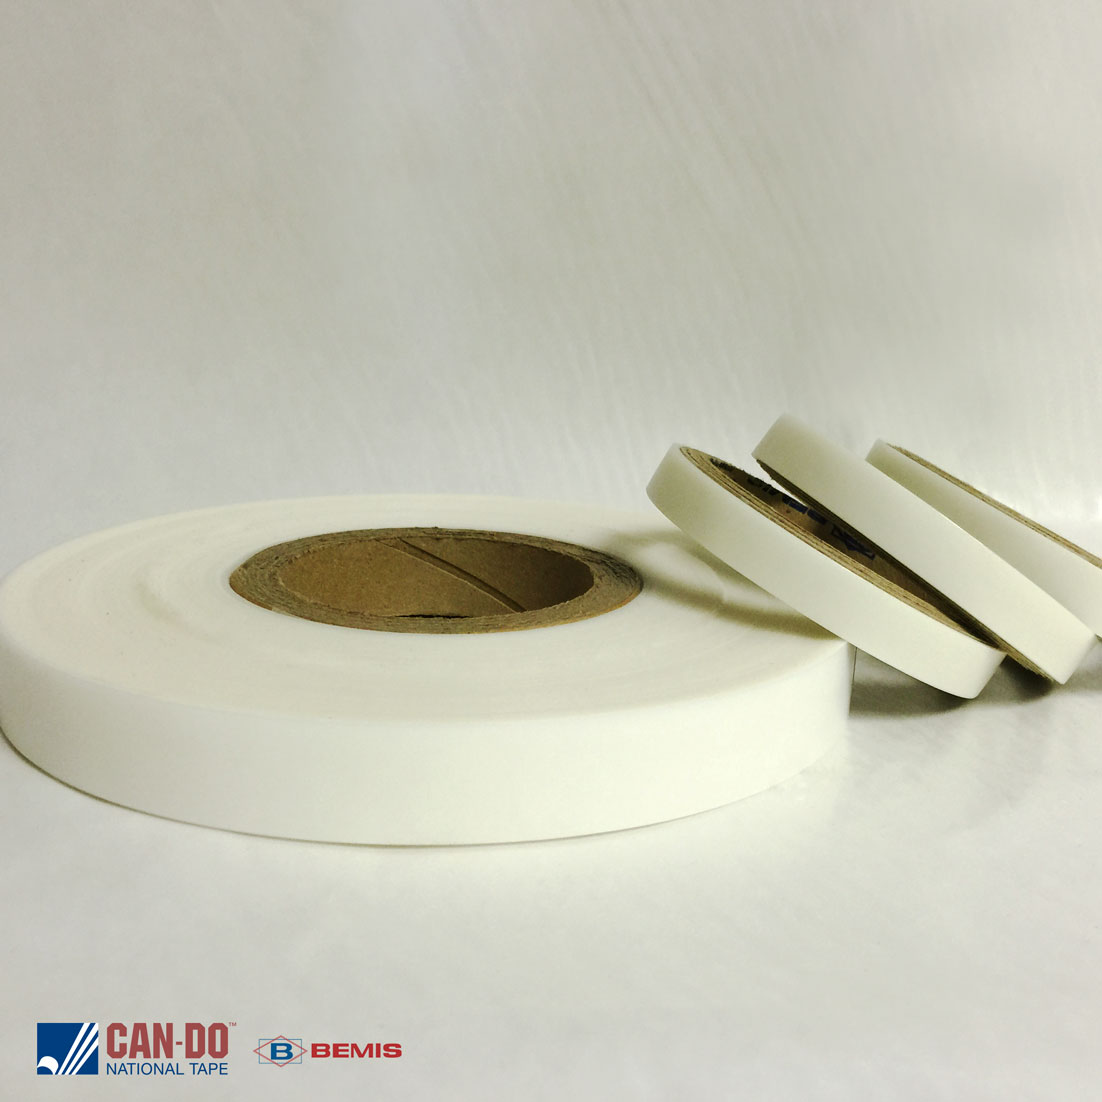 Automotive Heat Resistant Tape - Extreme Heat up to 350°F - Strong Adhesion